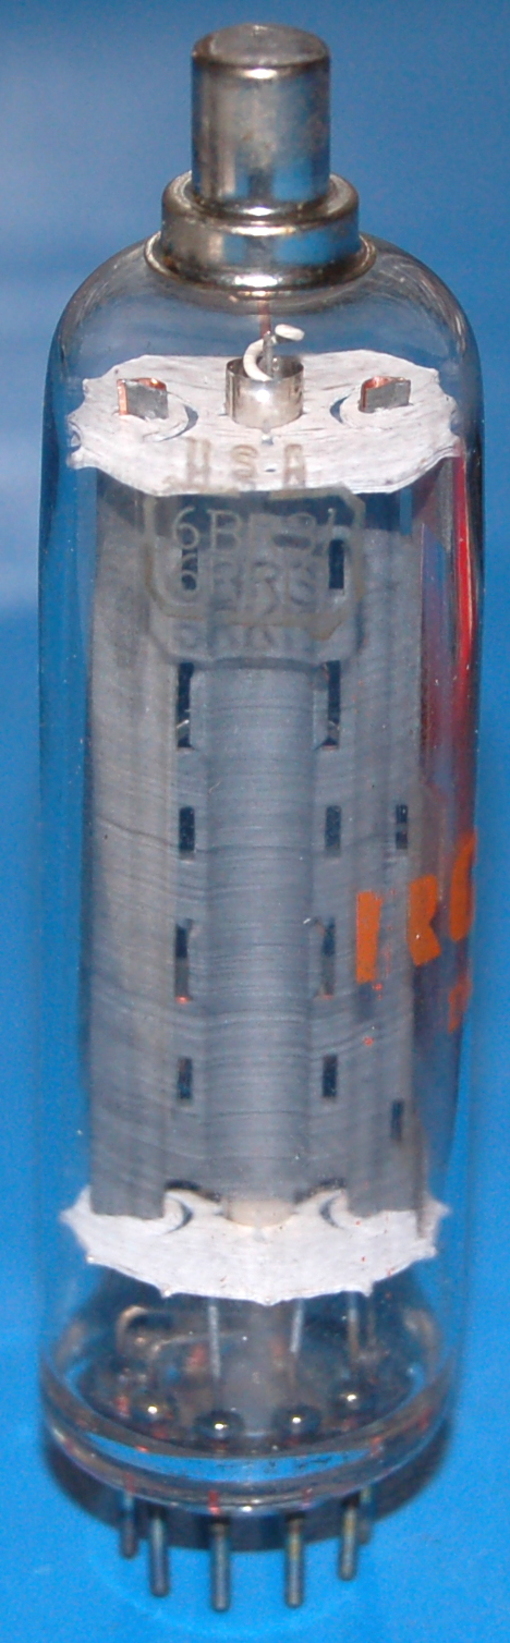 6BR3 Half-Wave Rectifier / Diode Tube